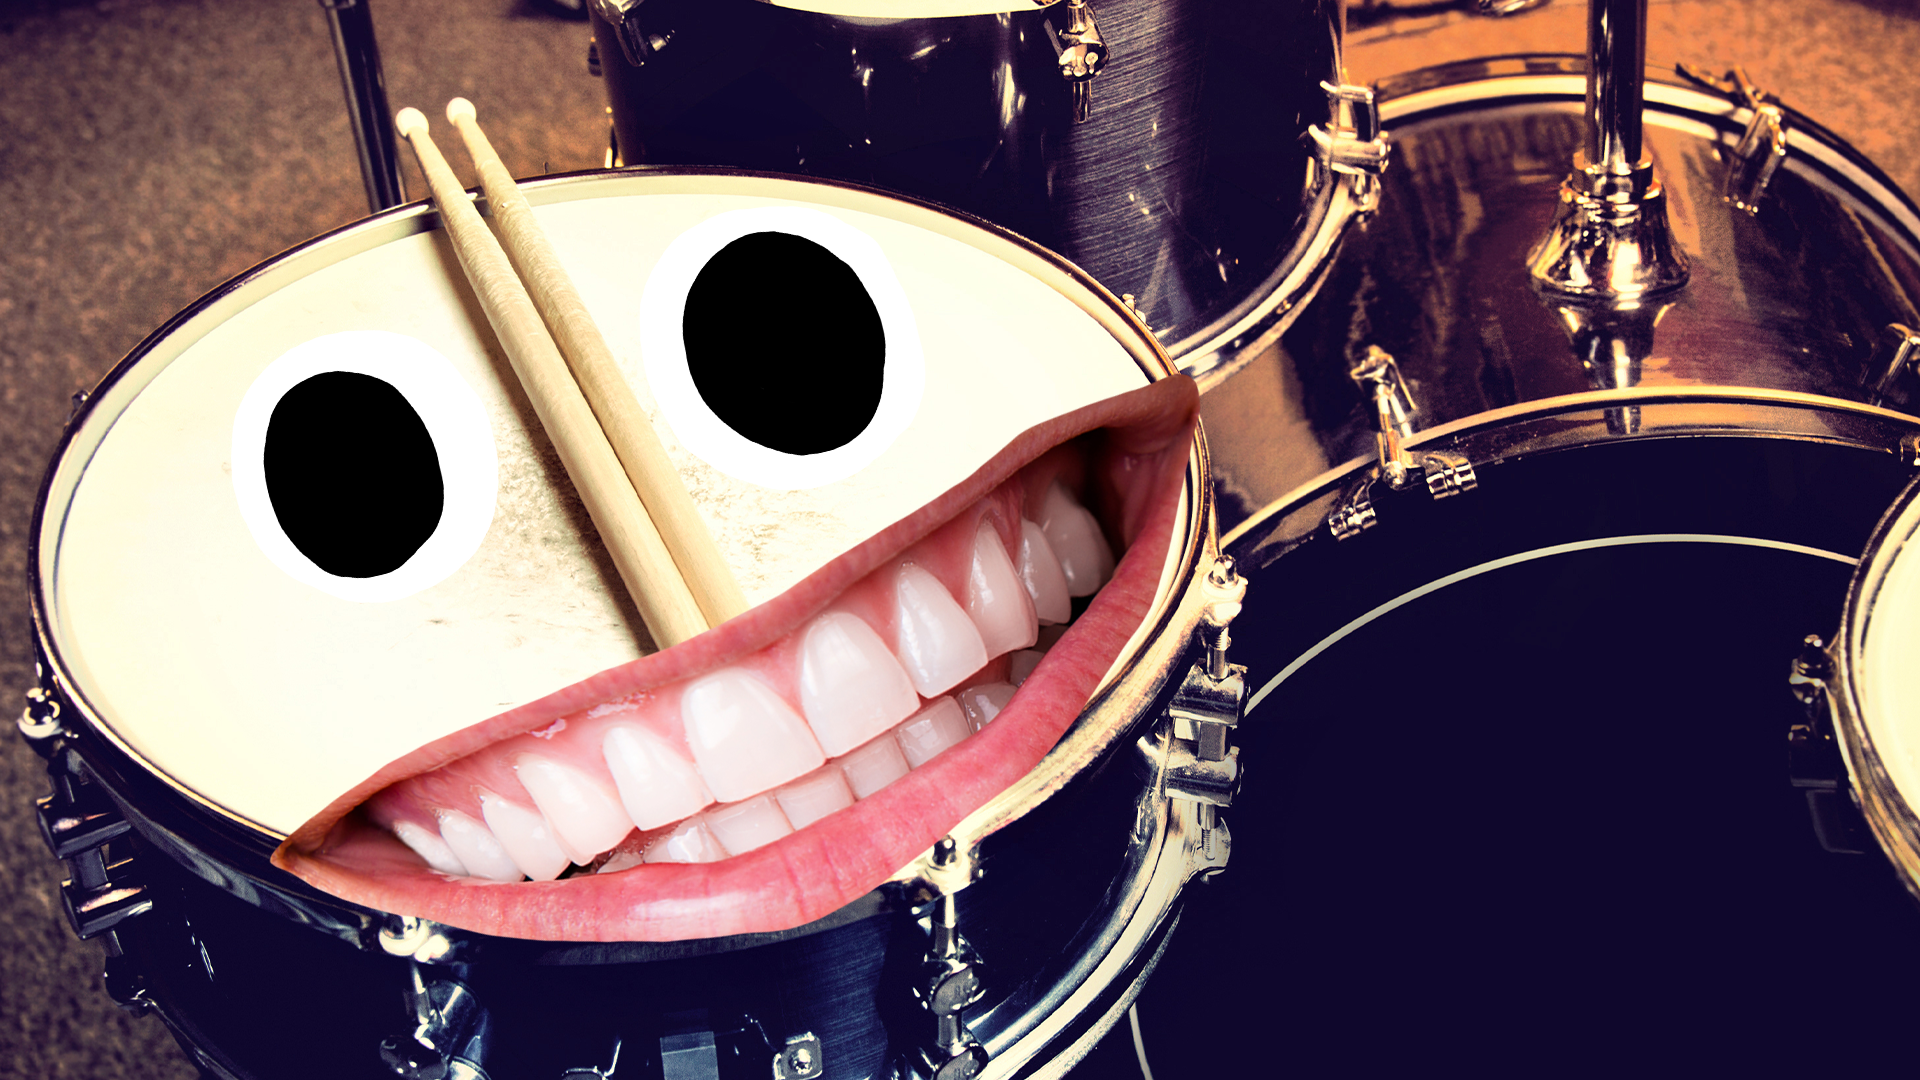 Drum set with a goofy face